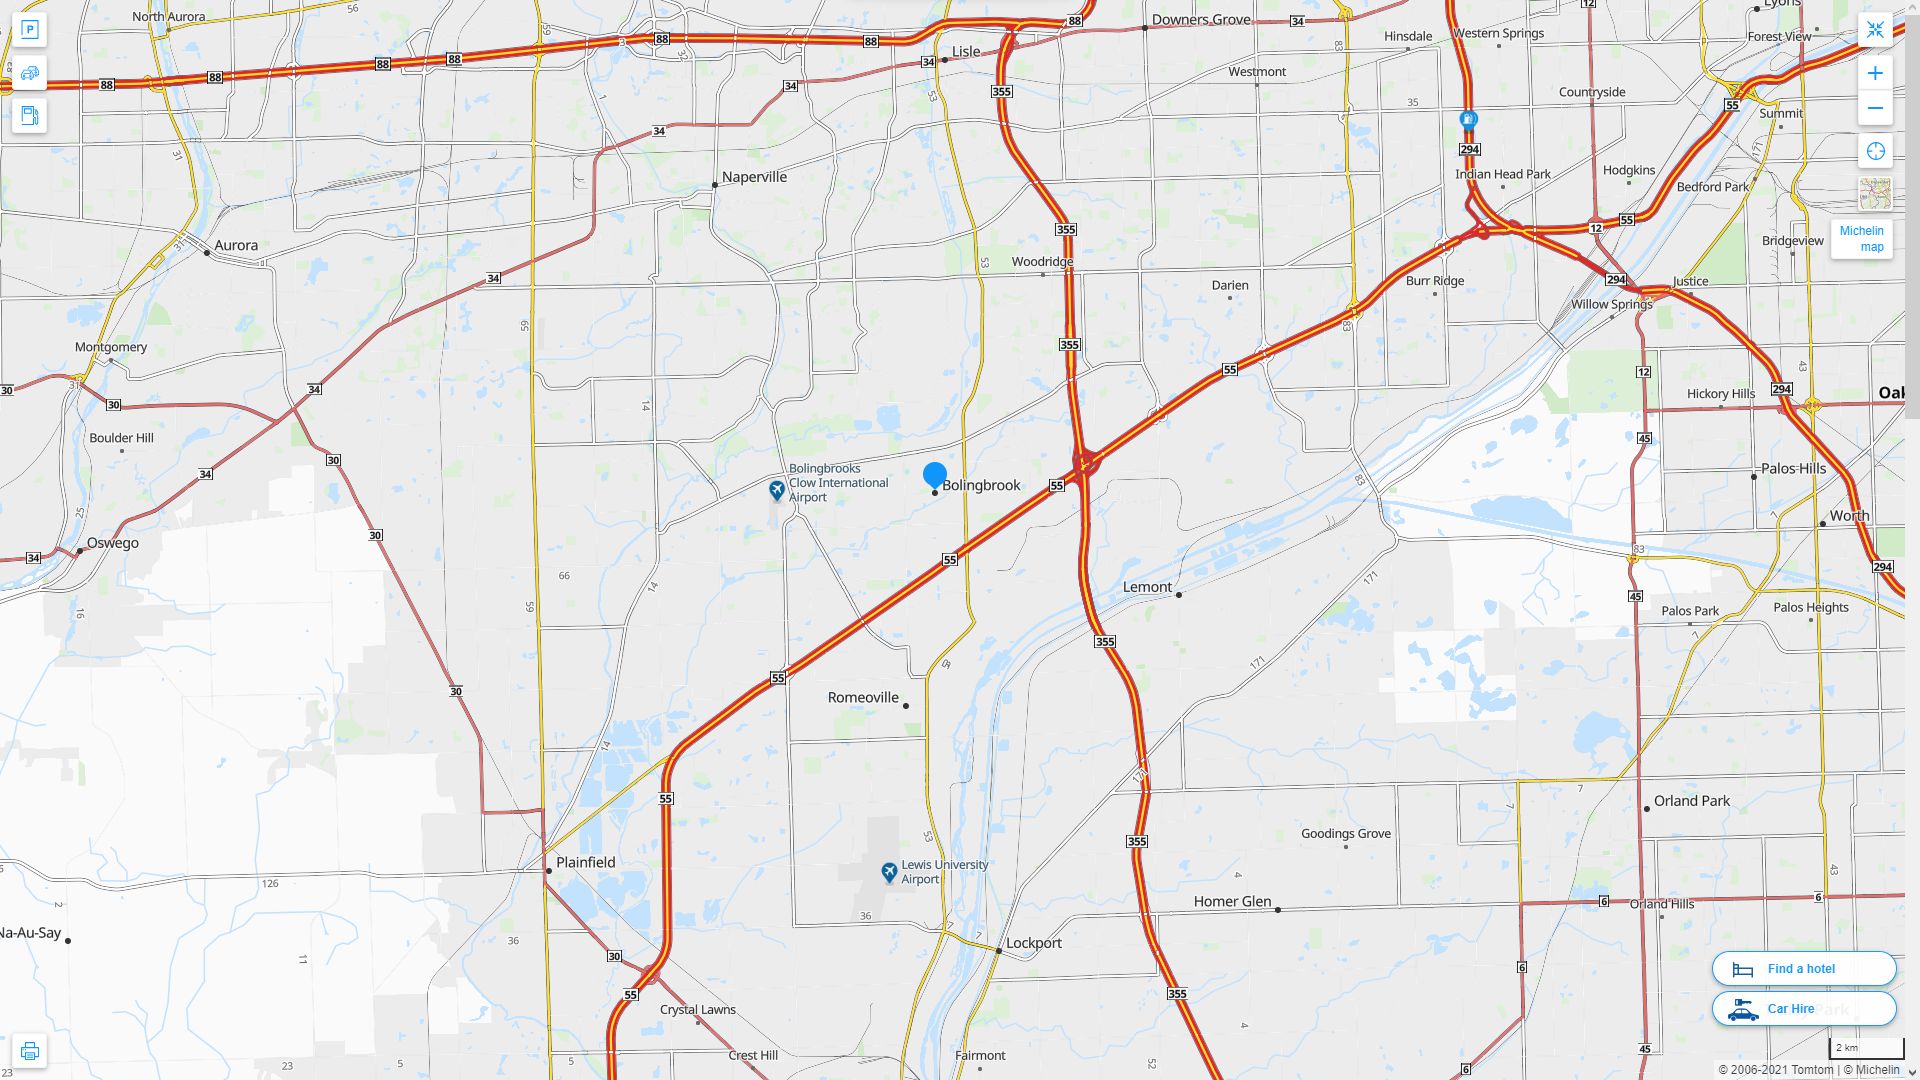 Bolingbrook illinois Highway and Road Map